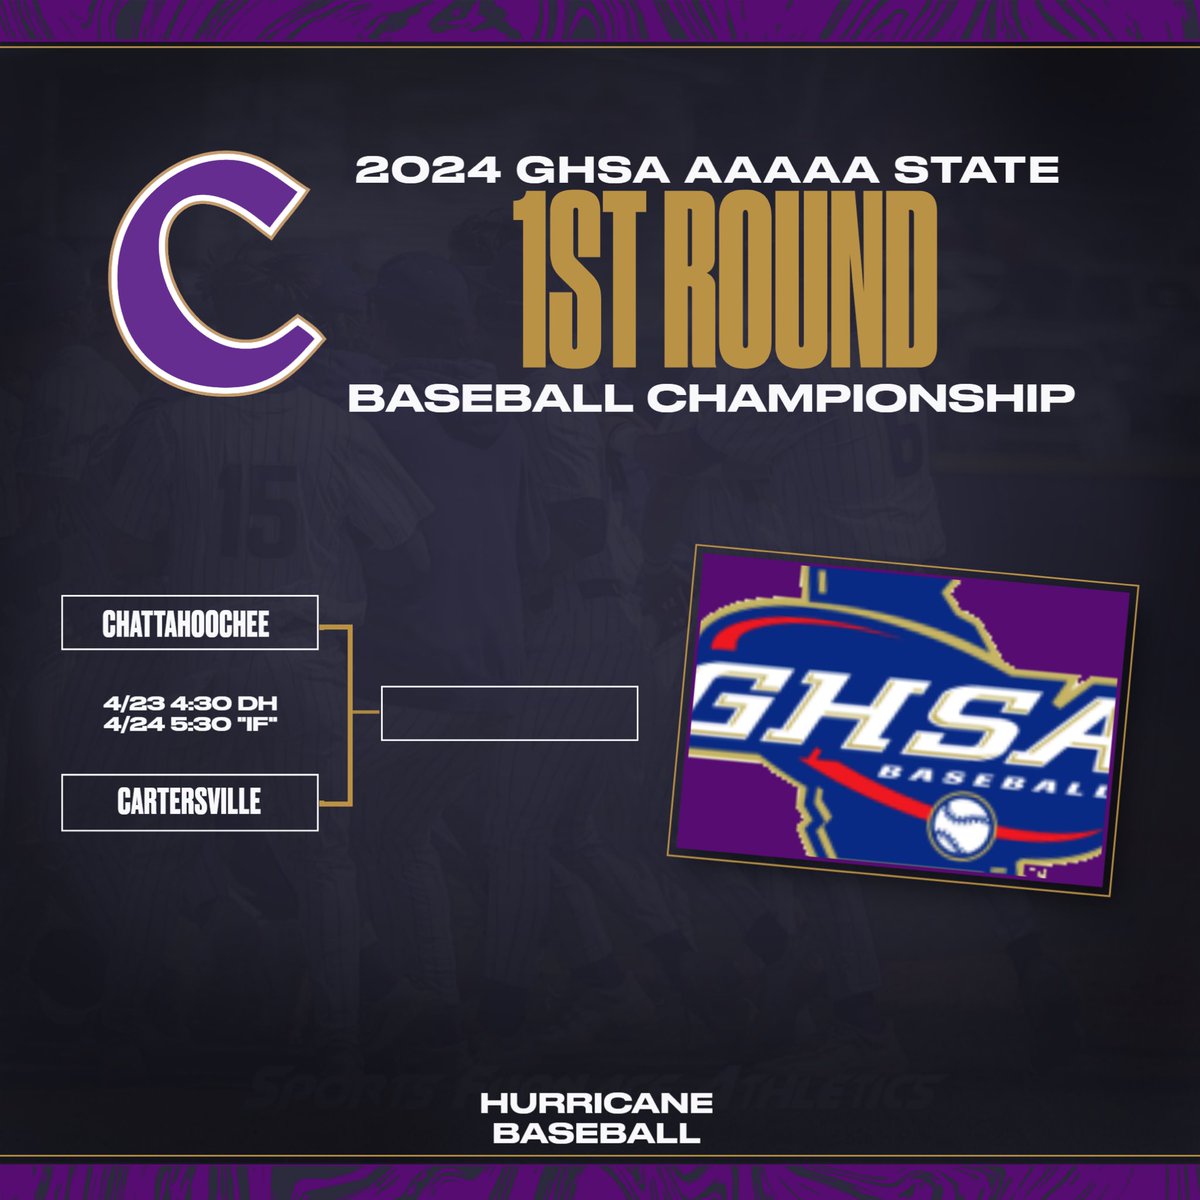 Cartersville will host Chattahoochee in the 1st Round of the GHSA AAAAA State Baseball Championship Tuesday, April 23 in a DH beginning at 4:30PM. The “If” Game is scheduled for Wednesday, April 24 at 5:30PM.